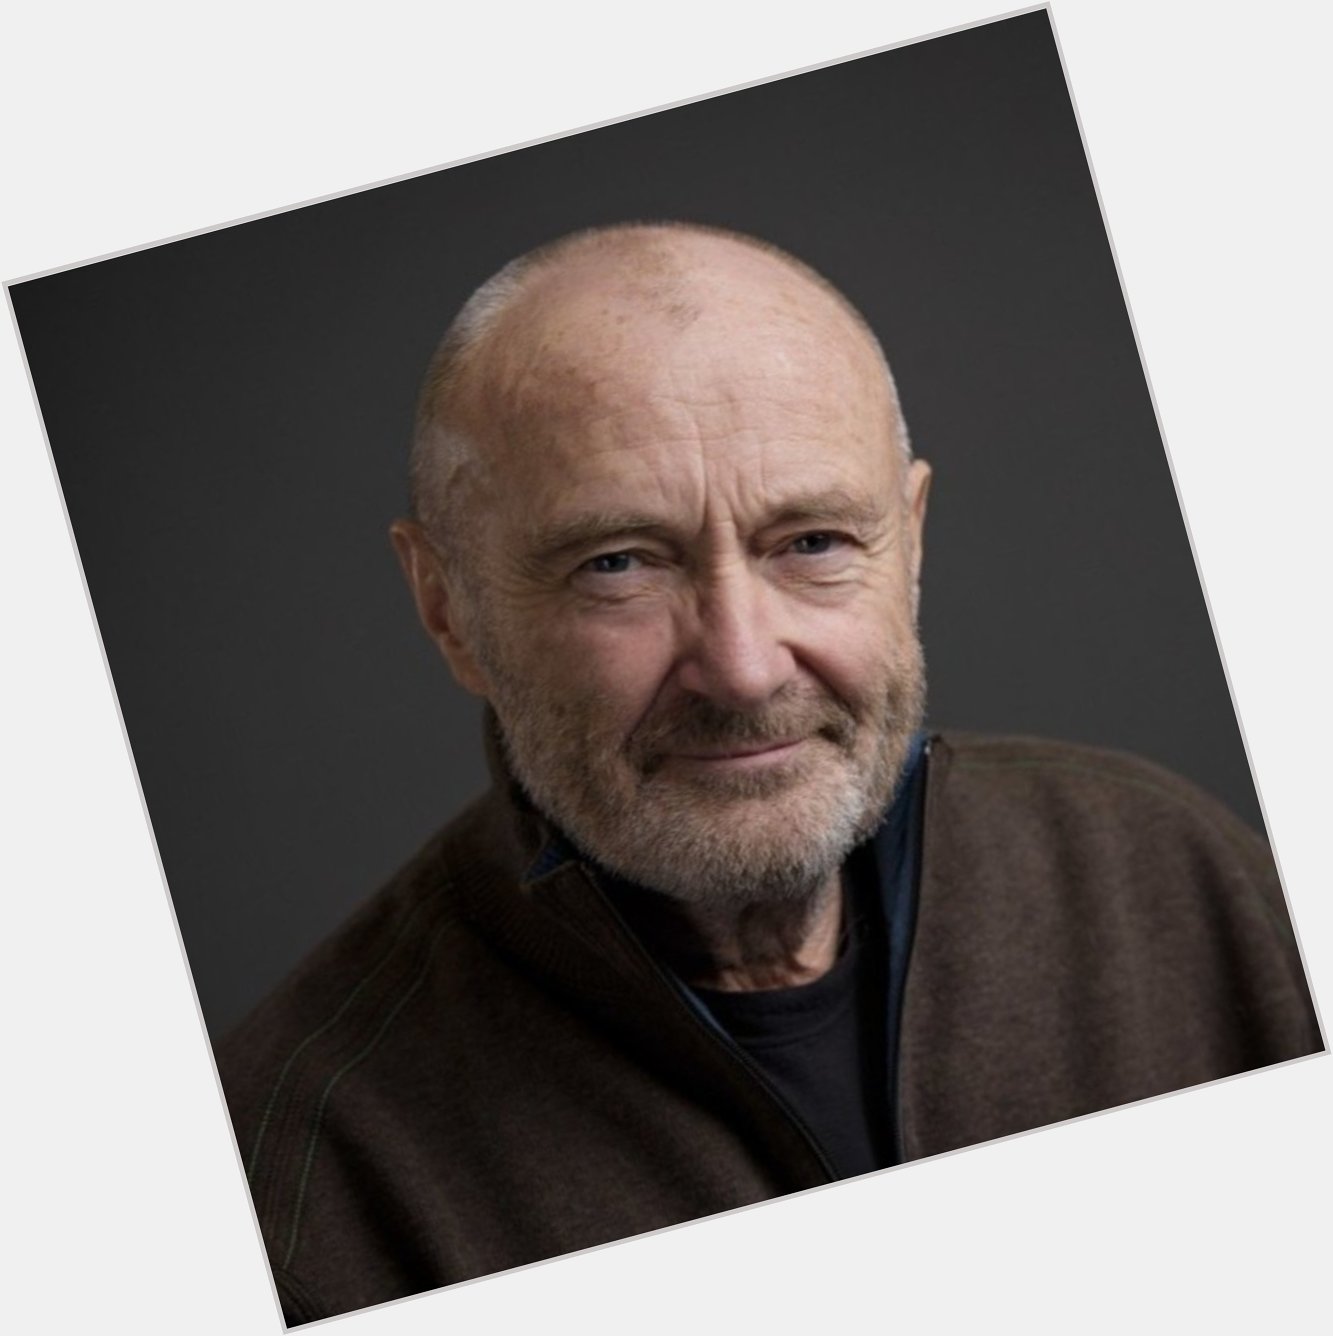 Happy 71 birthday to the amazing Genesis singer and drummer Phil Collins! 